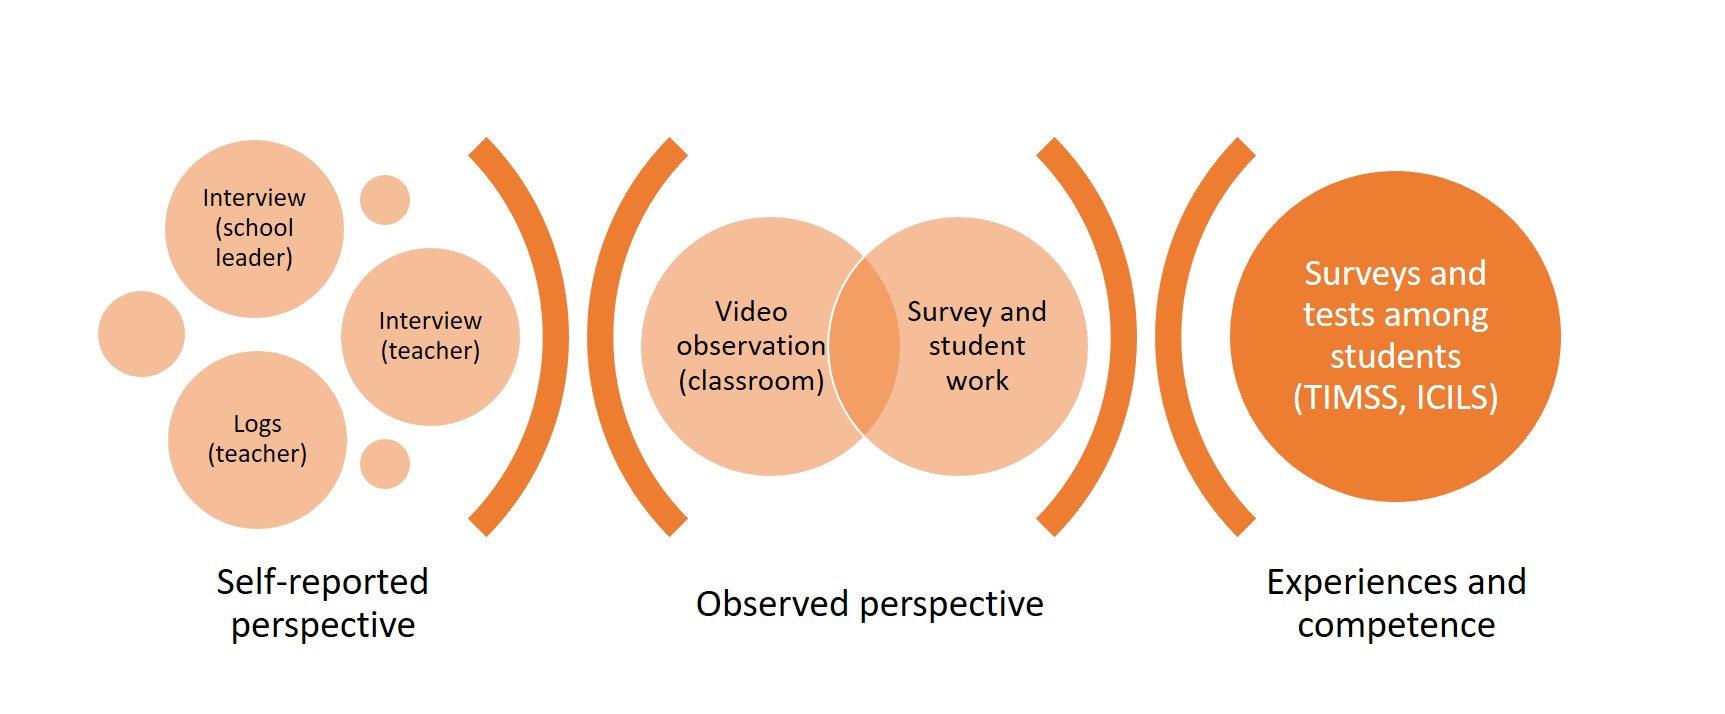 Figures consisting of circles in orange showing the research design of EDUCATE: the design combines different sources by studying the perspectives from teachers and school leaders (self-reported perspective), observing actual practices of teaching and classroom activities (observed perspective) and student experiences and measured competence (experiences and competence).